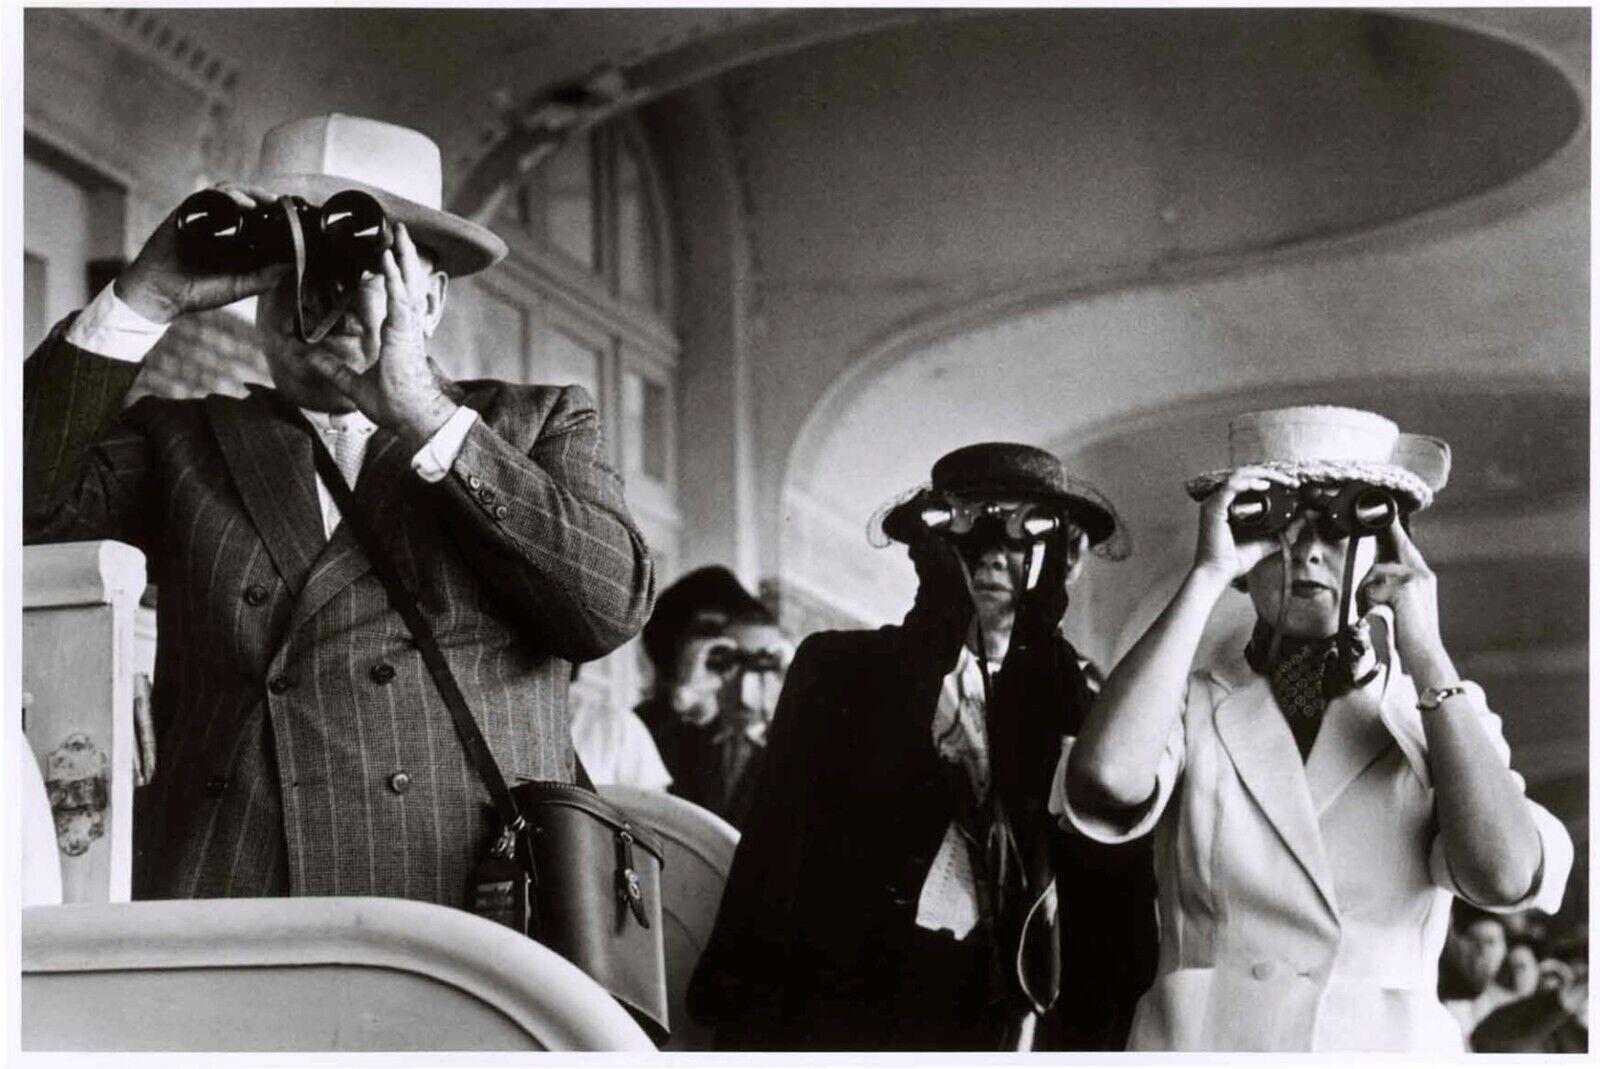 Robert Capa Black and White Photograph - Watching the horse races with binoculars, Deauville, France